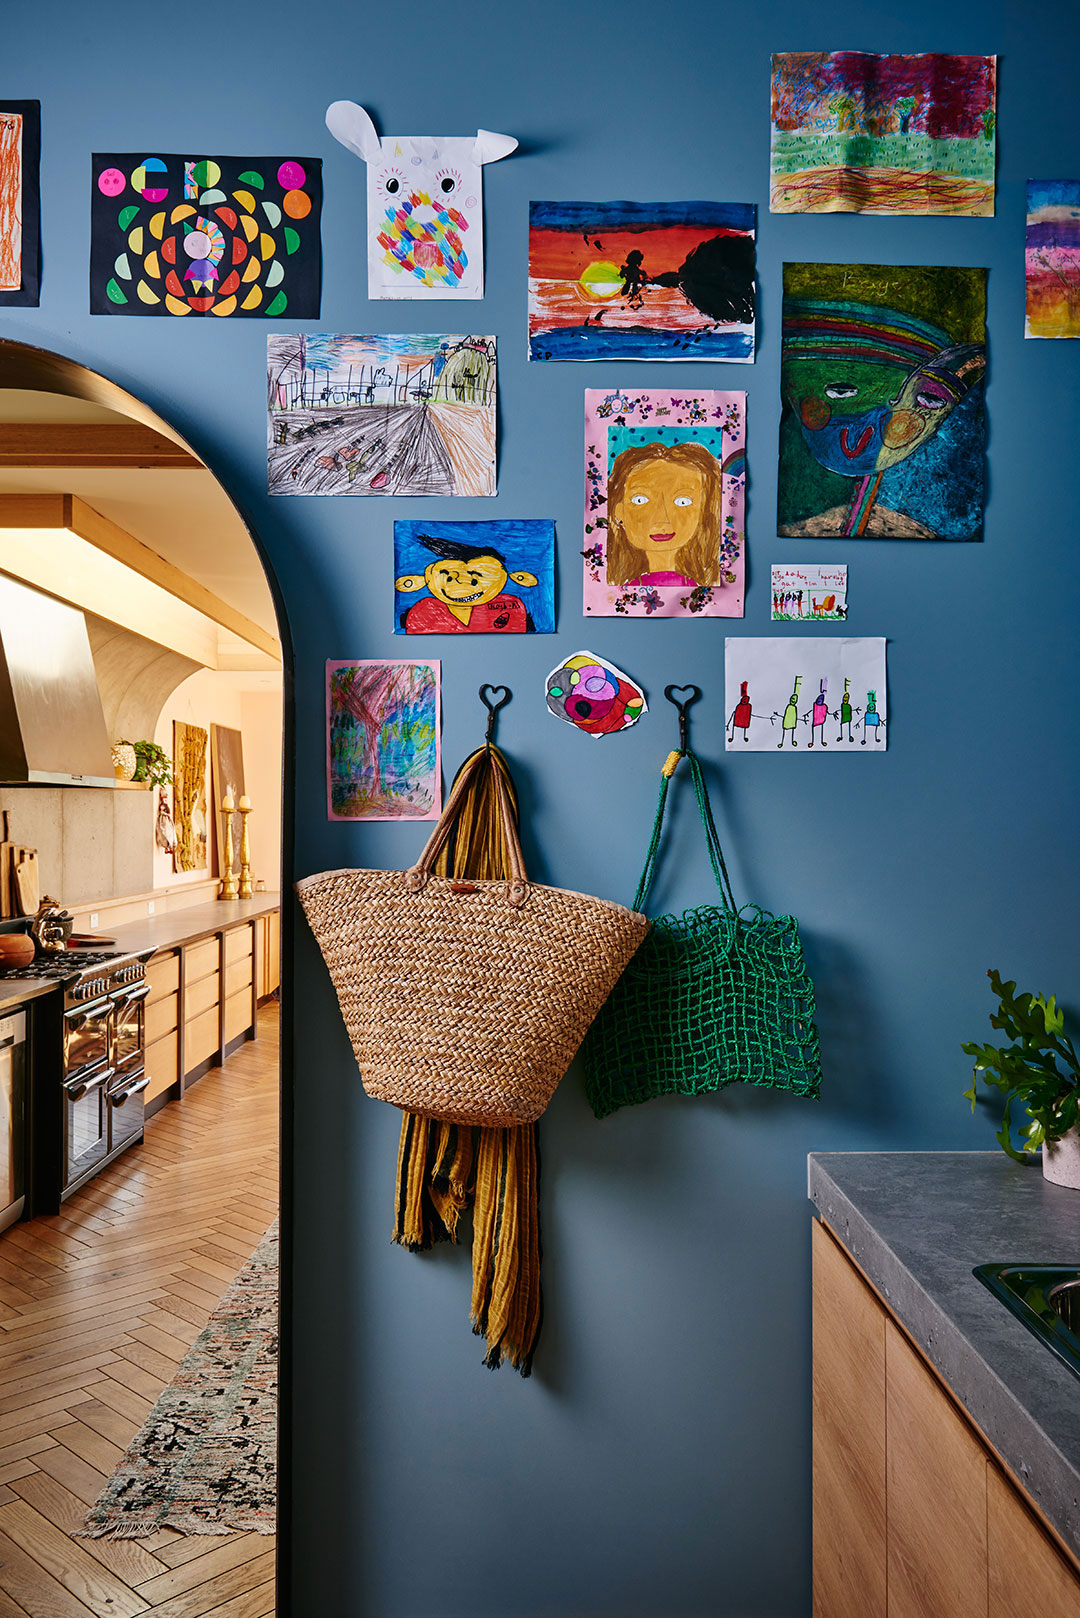 The colourful home of Kip & Co's Hayley Pannekoecke